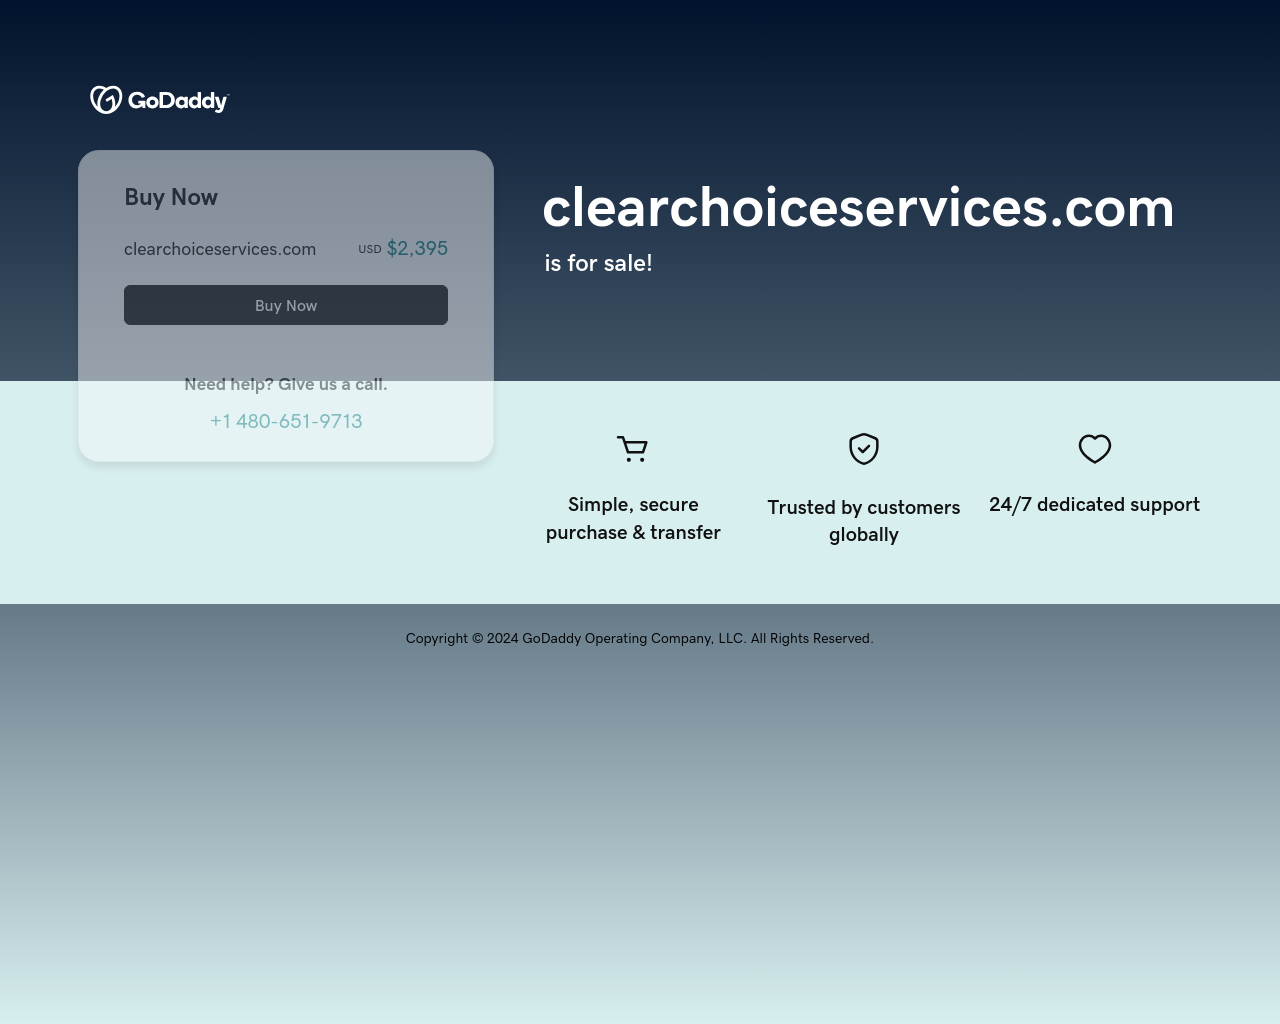 clearchoiceservices.com